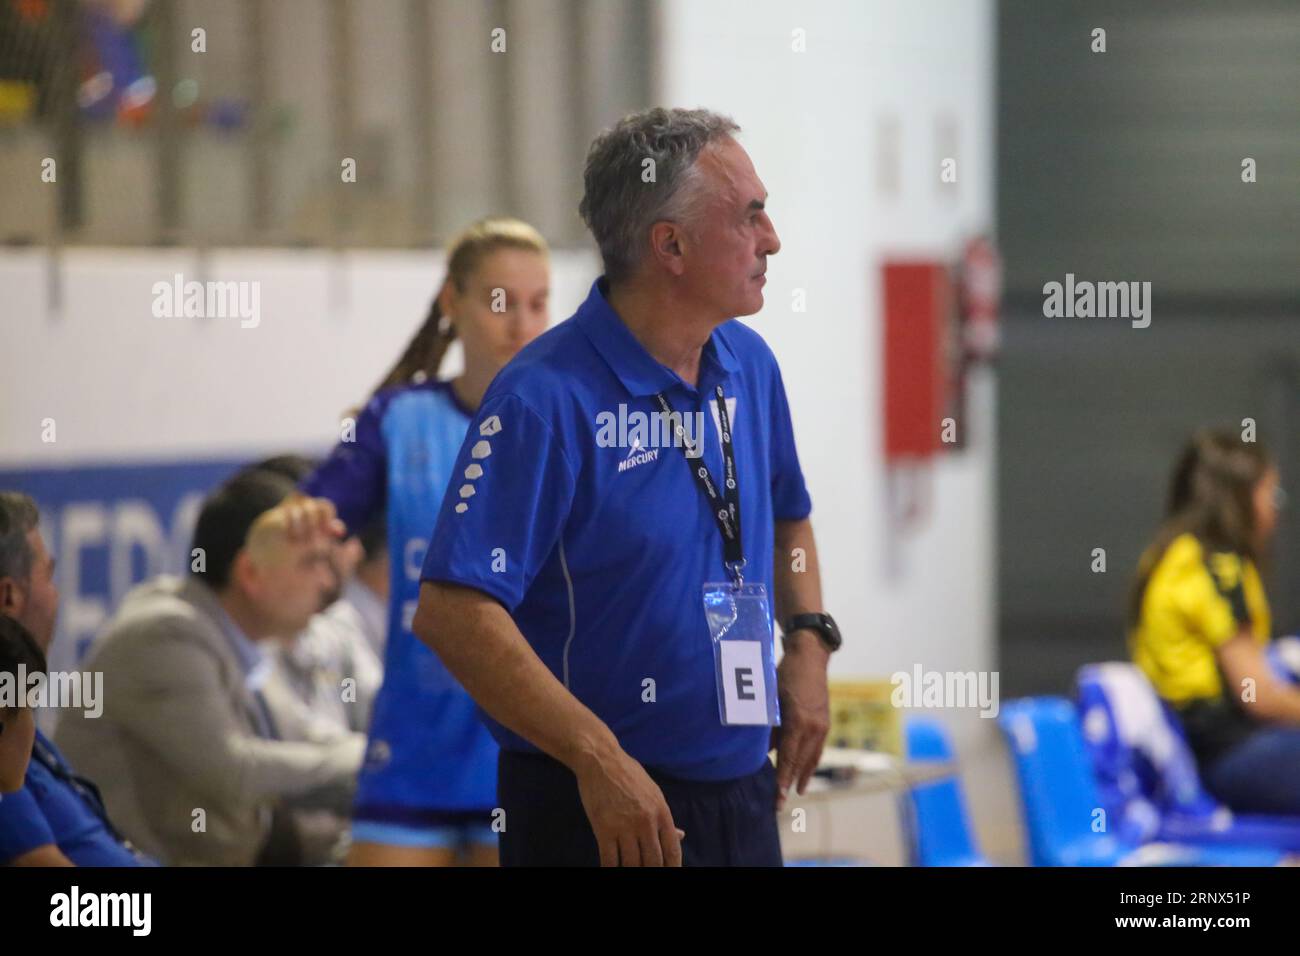 Oviedo, Spain, September 02nd, 2023: The coach of Lobas Global Atac Oviedo, Manuel Diaz during the first day of the Liga Guerreras Iberdrola between Lobas Global Atac Oviedo and Caja Rural Aula Valladolid, on September 02, 2023, in the Florida Arena Municipal Sports Center, in Oviedo, Spain. Credit: Alberto Brevers / Alamy Live News. Stock Photo